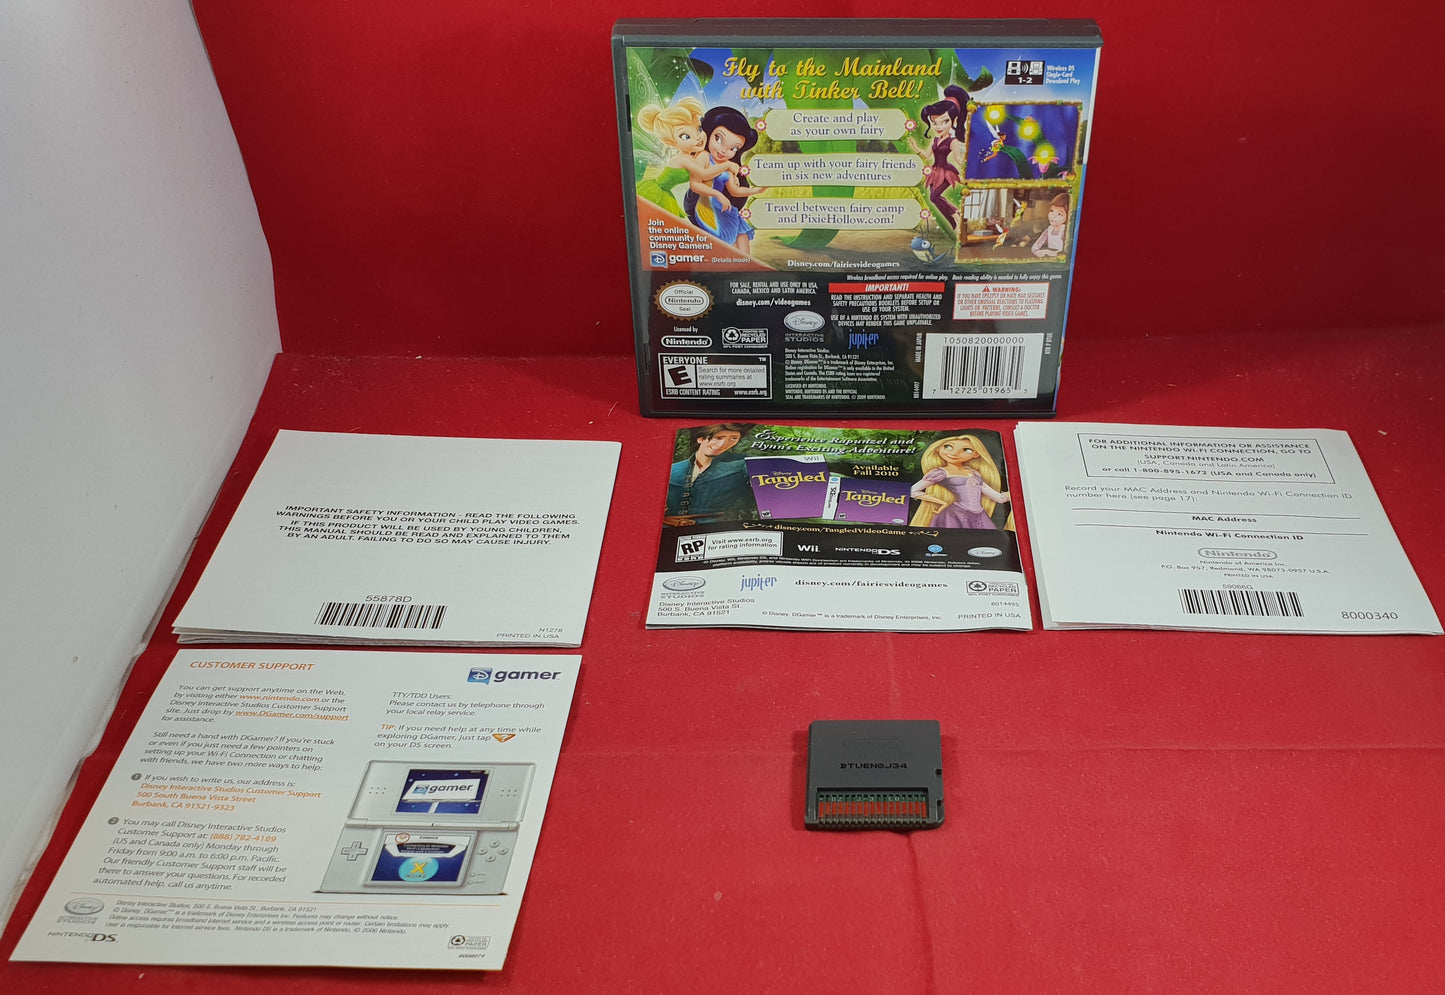 Tinker Bell and the Great Fairy Rescue Nintendo DS Game